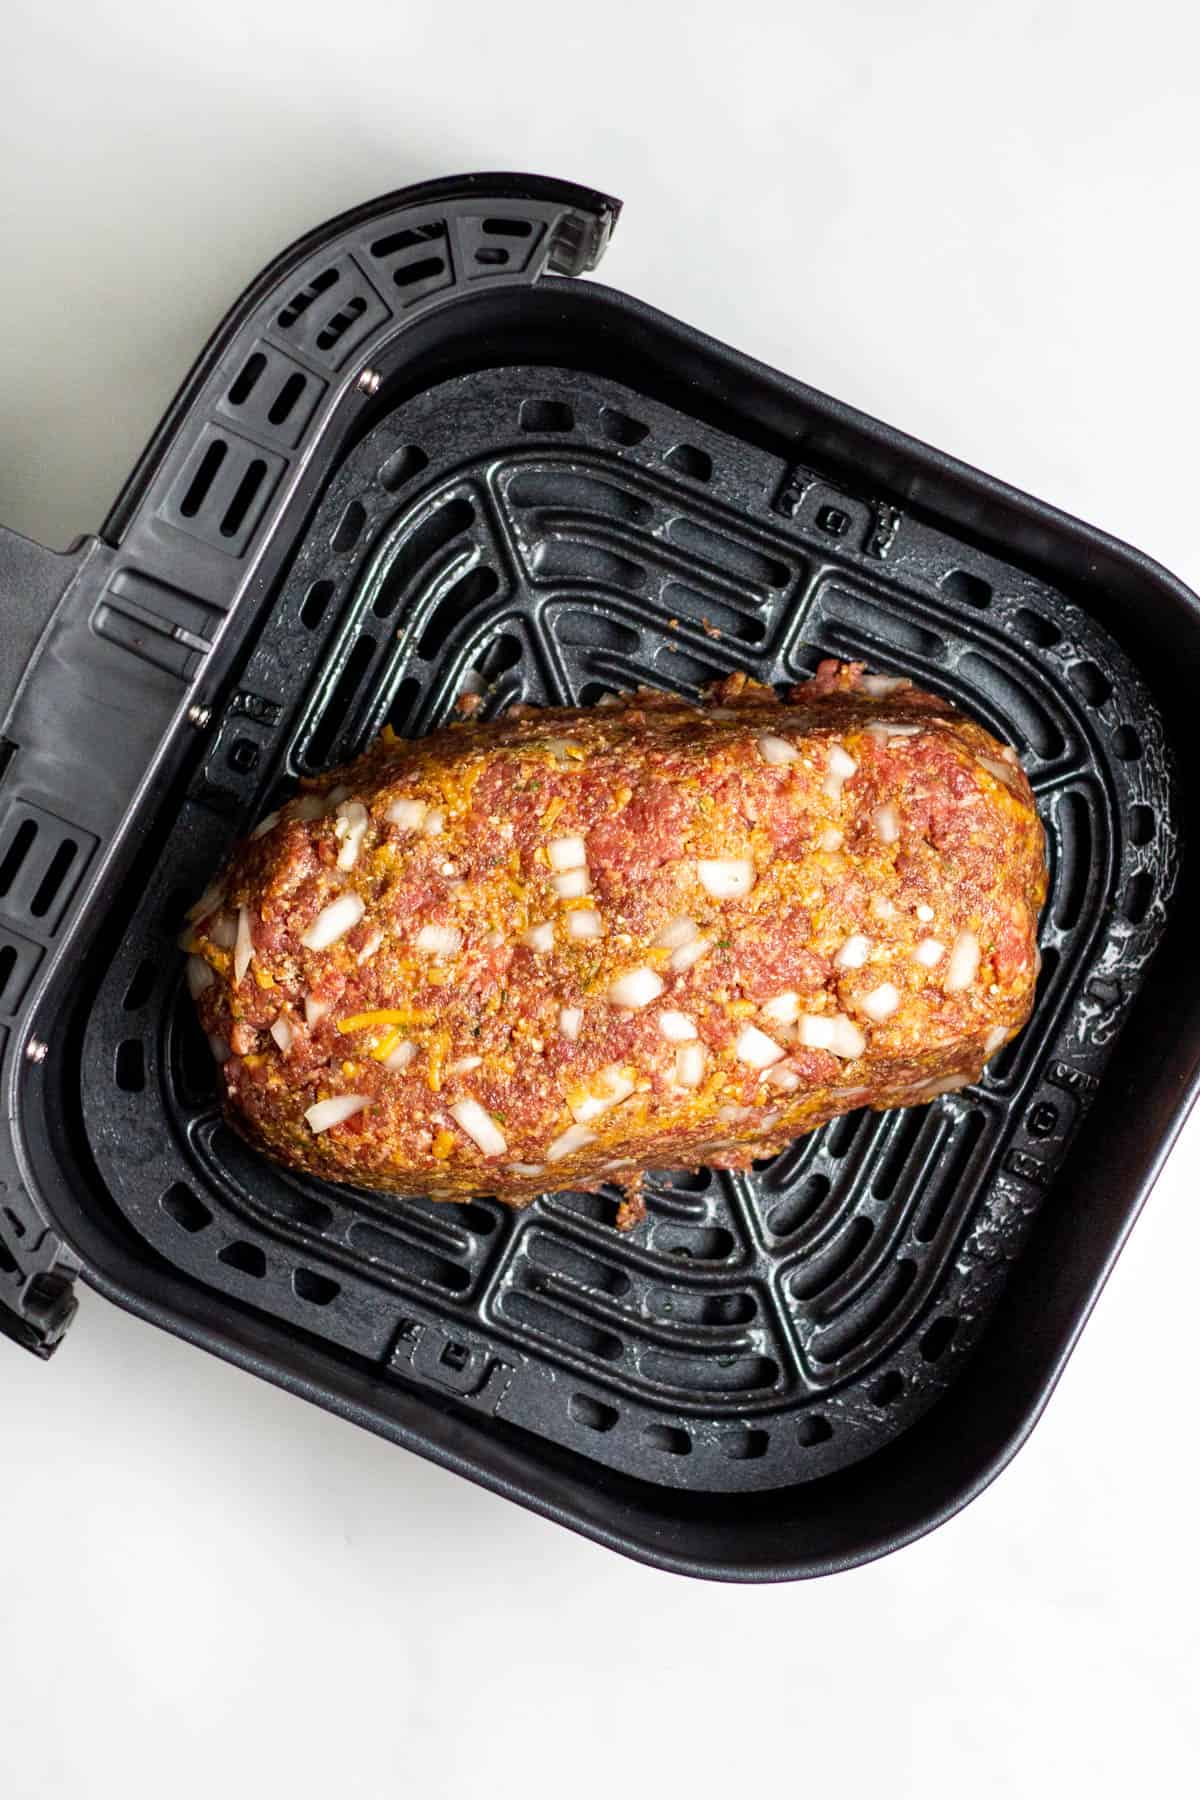 meatloaf shaped into a loaf in an air fryer